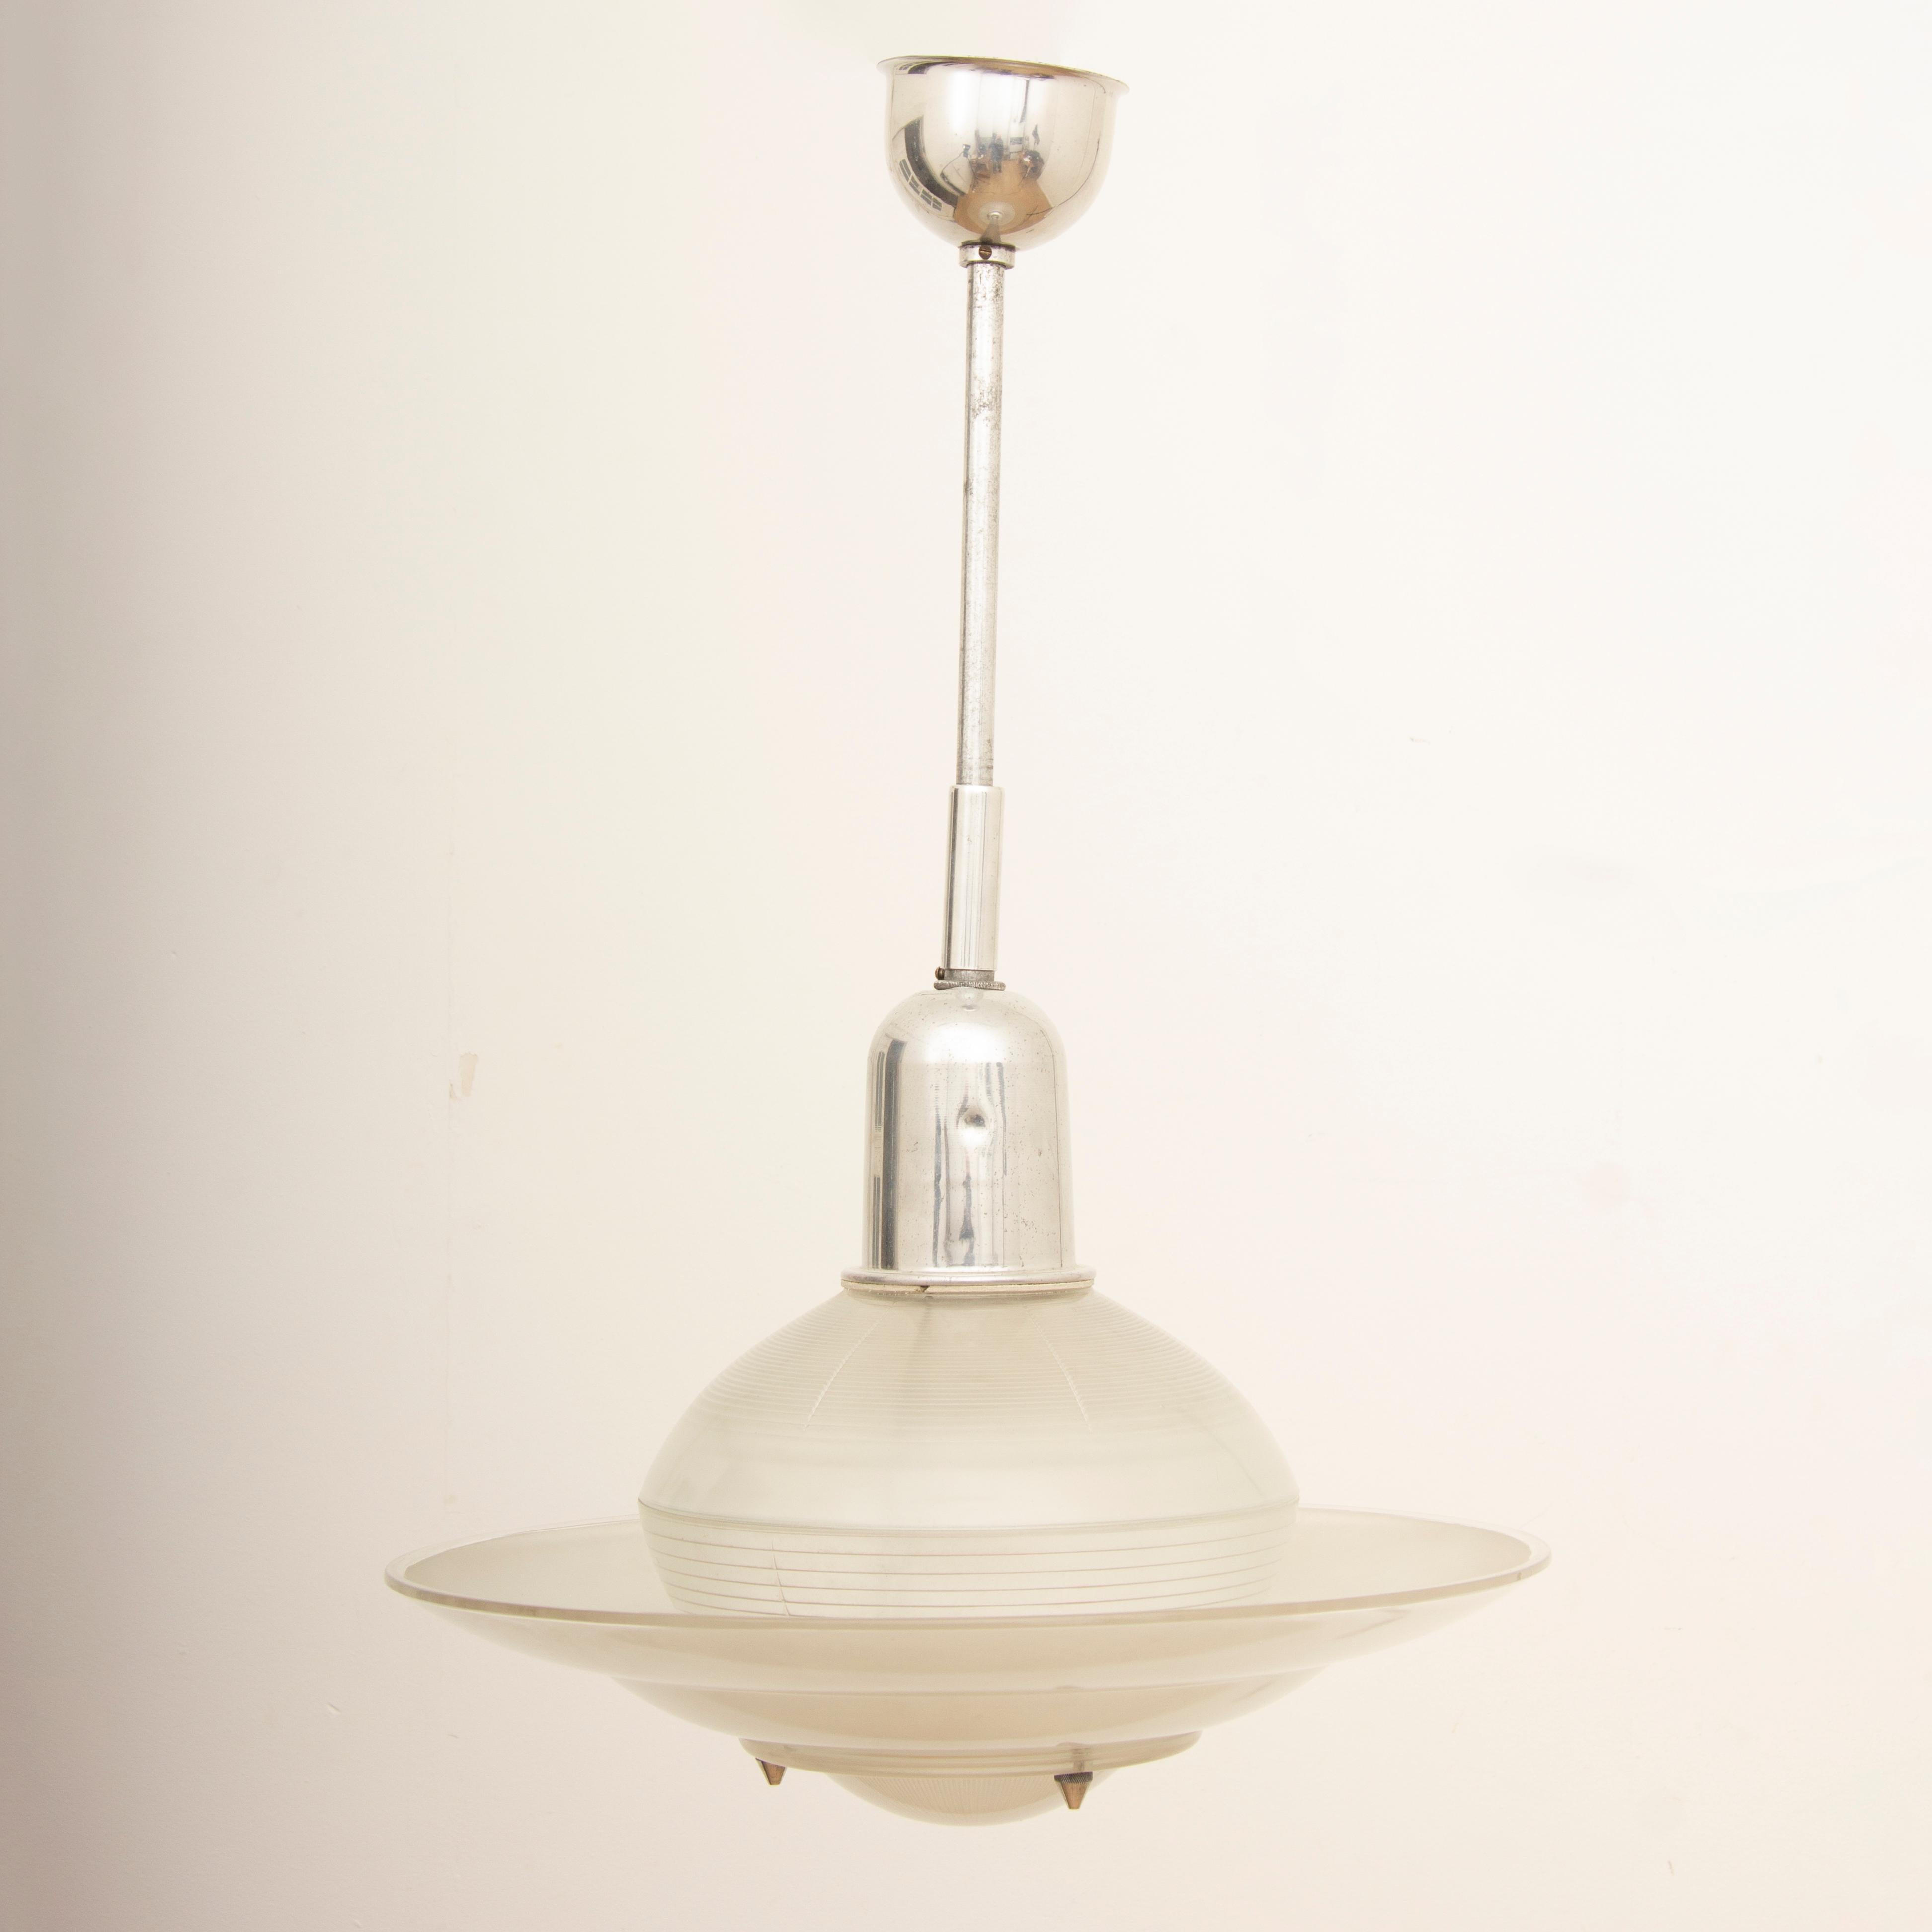 1950s Holophane hanging opaline and aluminium glass Space Age UFO light. The opaline glass shade is suspended from a matte aluminium fitting and rod with a matching cup at the top to hide the wires. The lower shade is fixed to the upper dome with